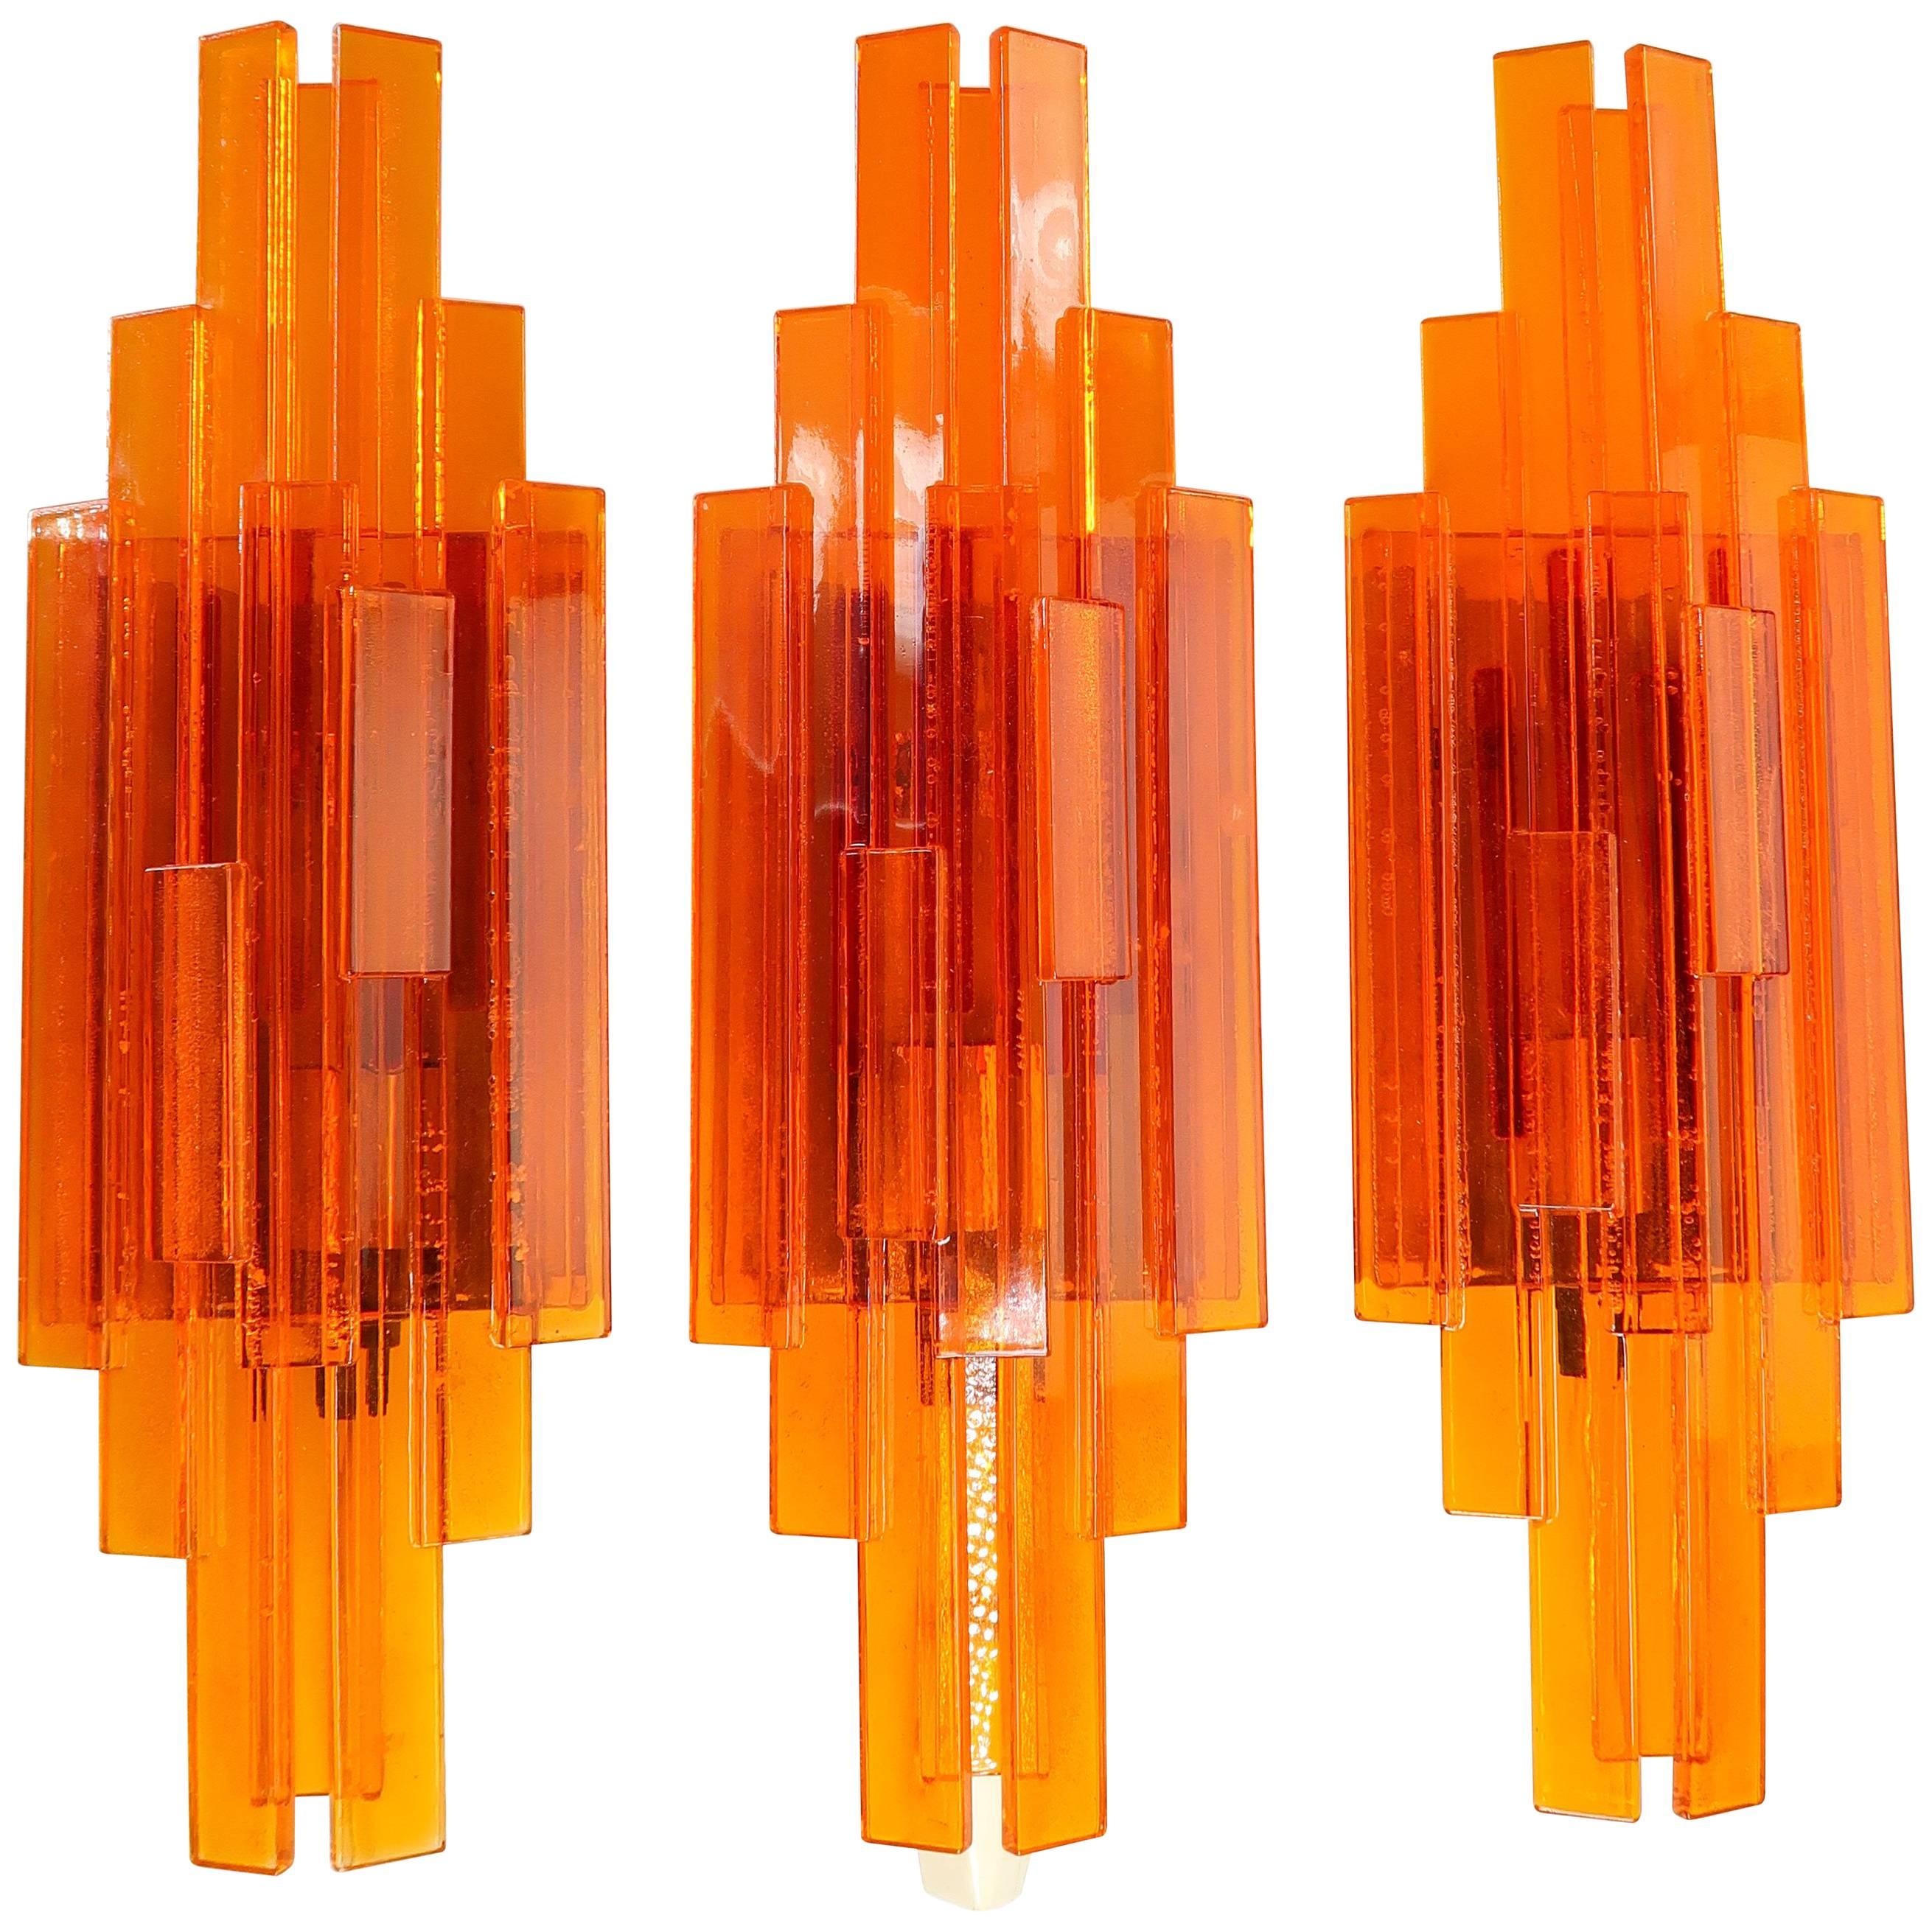 Trio of Danish Space Age Orange Acrylic Wall Lights by Claus Bolby, 1975